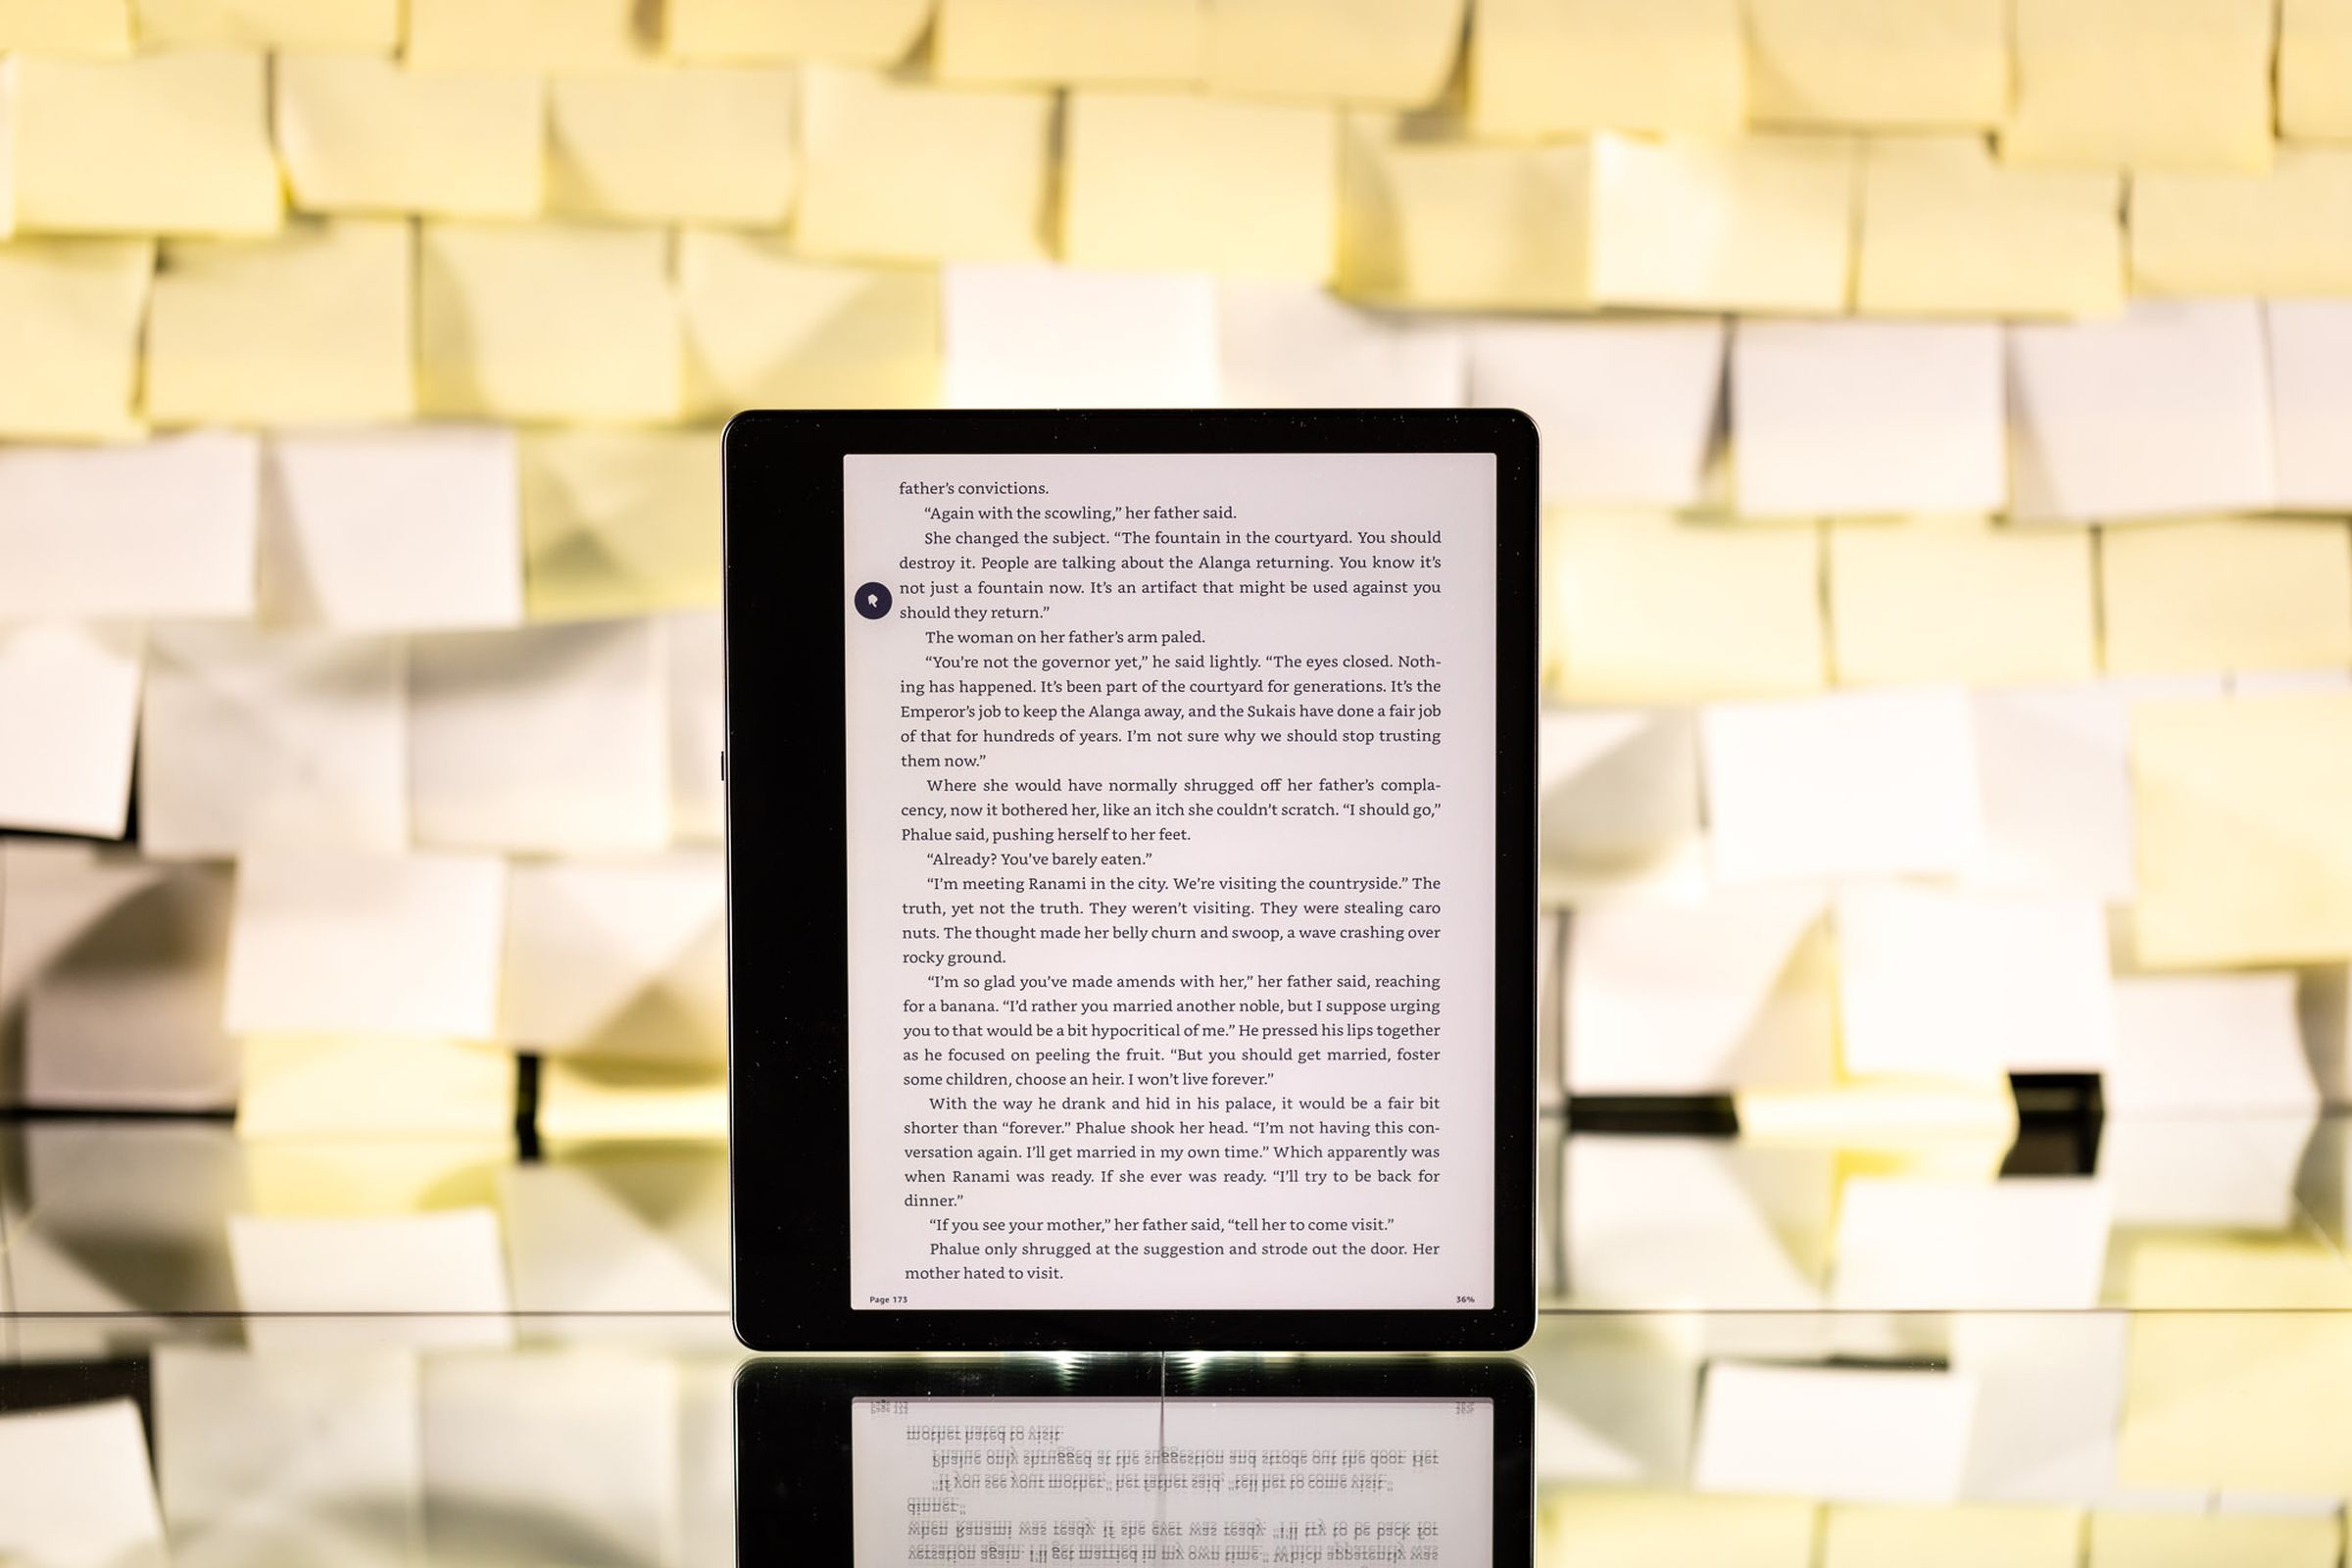 The Kindle Scribe turned on against a backdrop of Post-it notes.